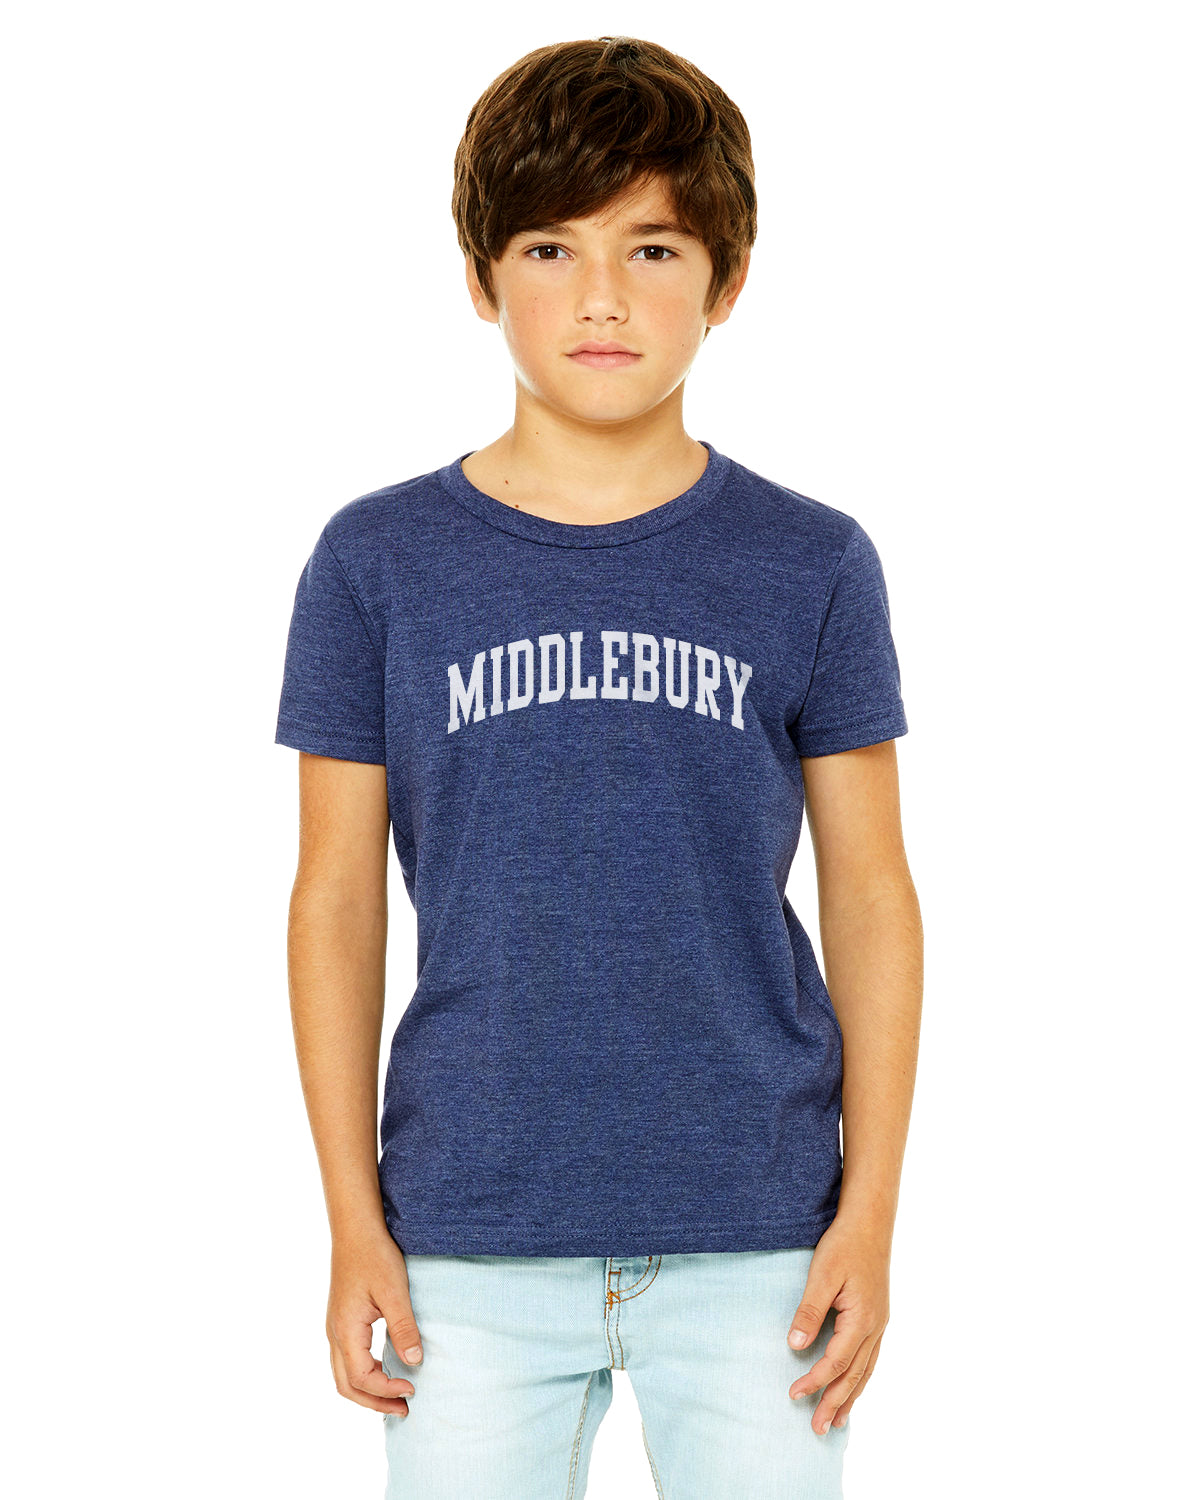 Middlebury Youth T-Shirt Heather Navy (BC TriBlend)